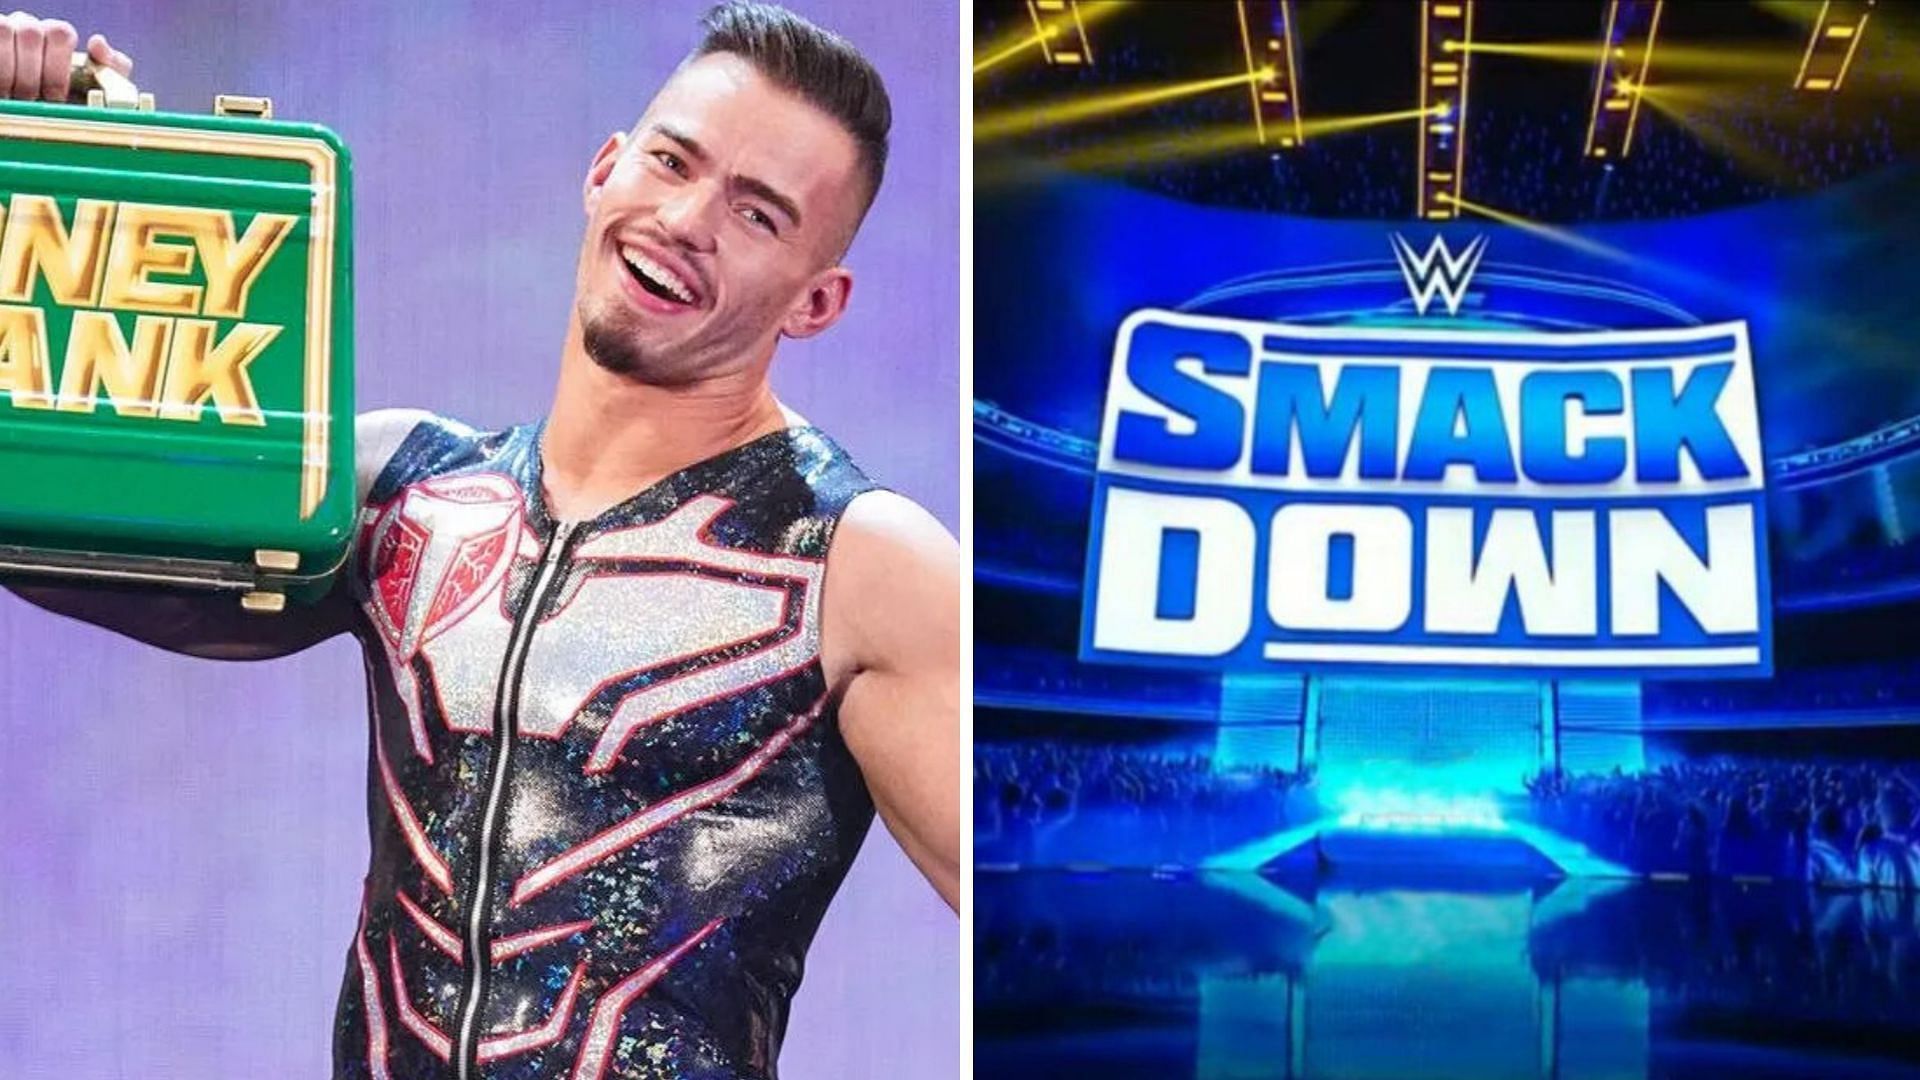 WWE Money in the Bank winner Austin Theory possibly scheduled for match on SmackDown